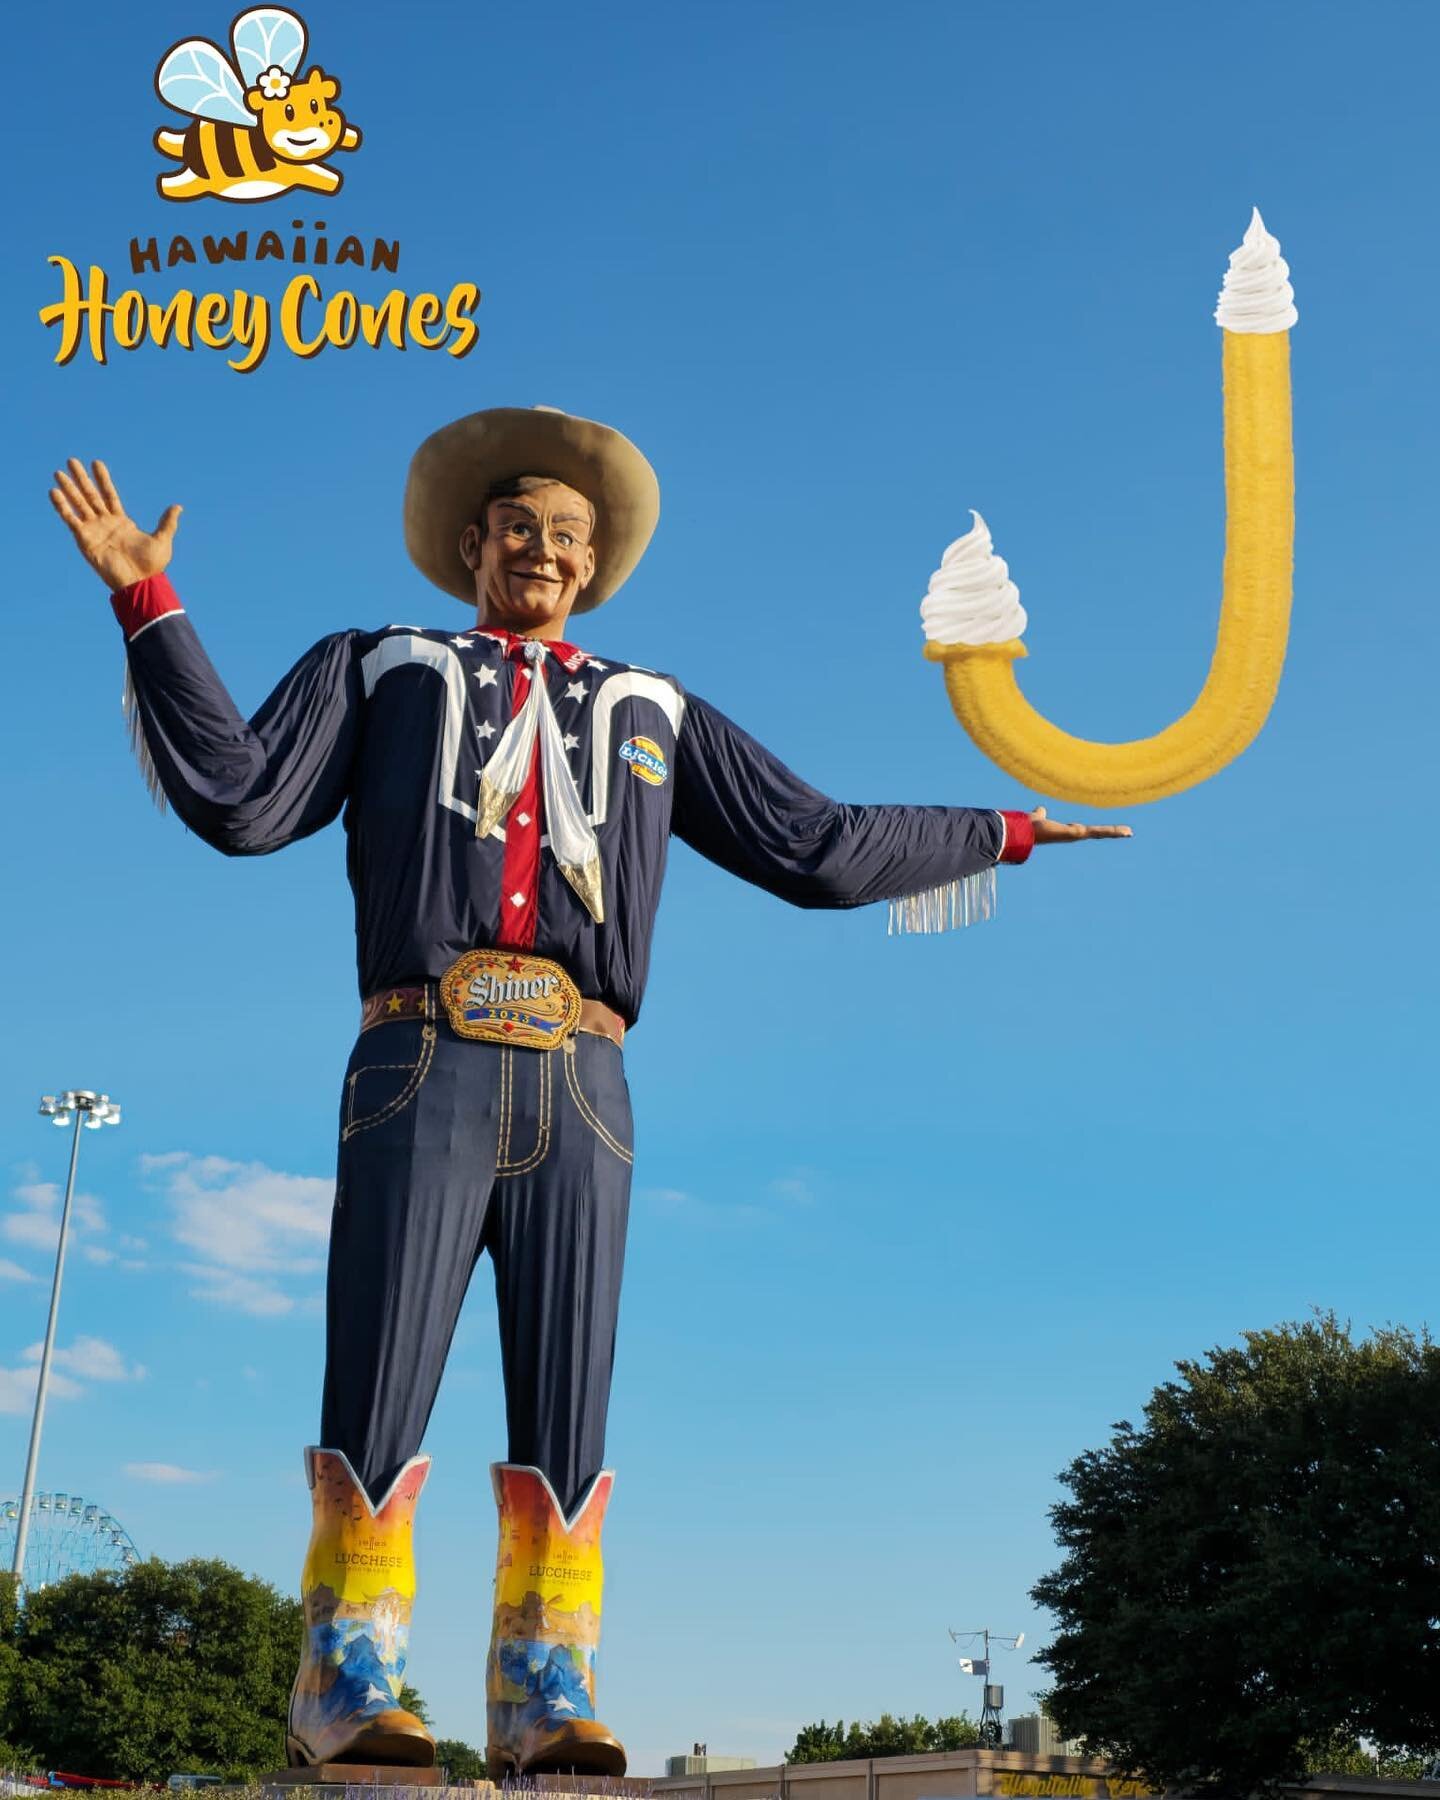 Coming to the State Fair of Texas! They say everything is bigger in Texas so how about this Giant J-Shaped Hawaiian Honey Cone😋Filled all way through with our Hokkaido ice cream, this is a must have after the rides🍦
Sept 29-Oct 22
.
.
.
#statefairo